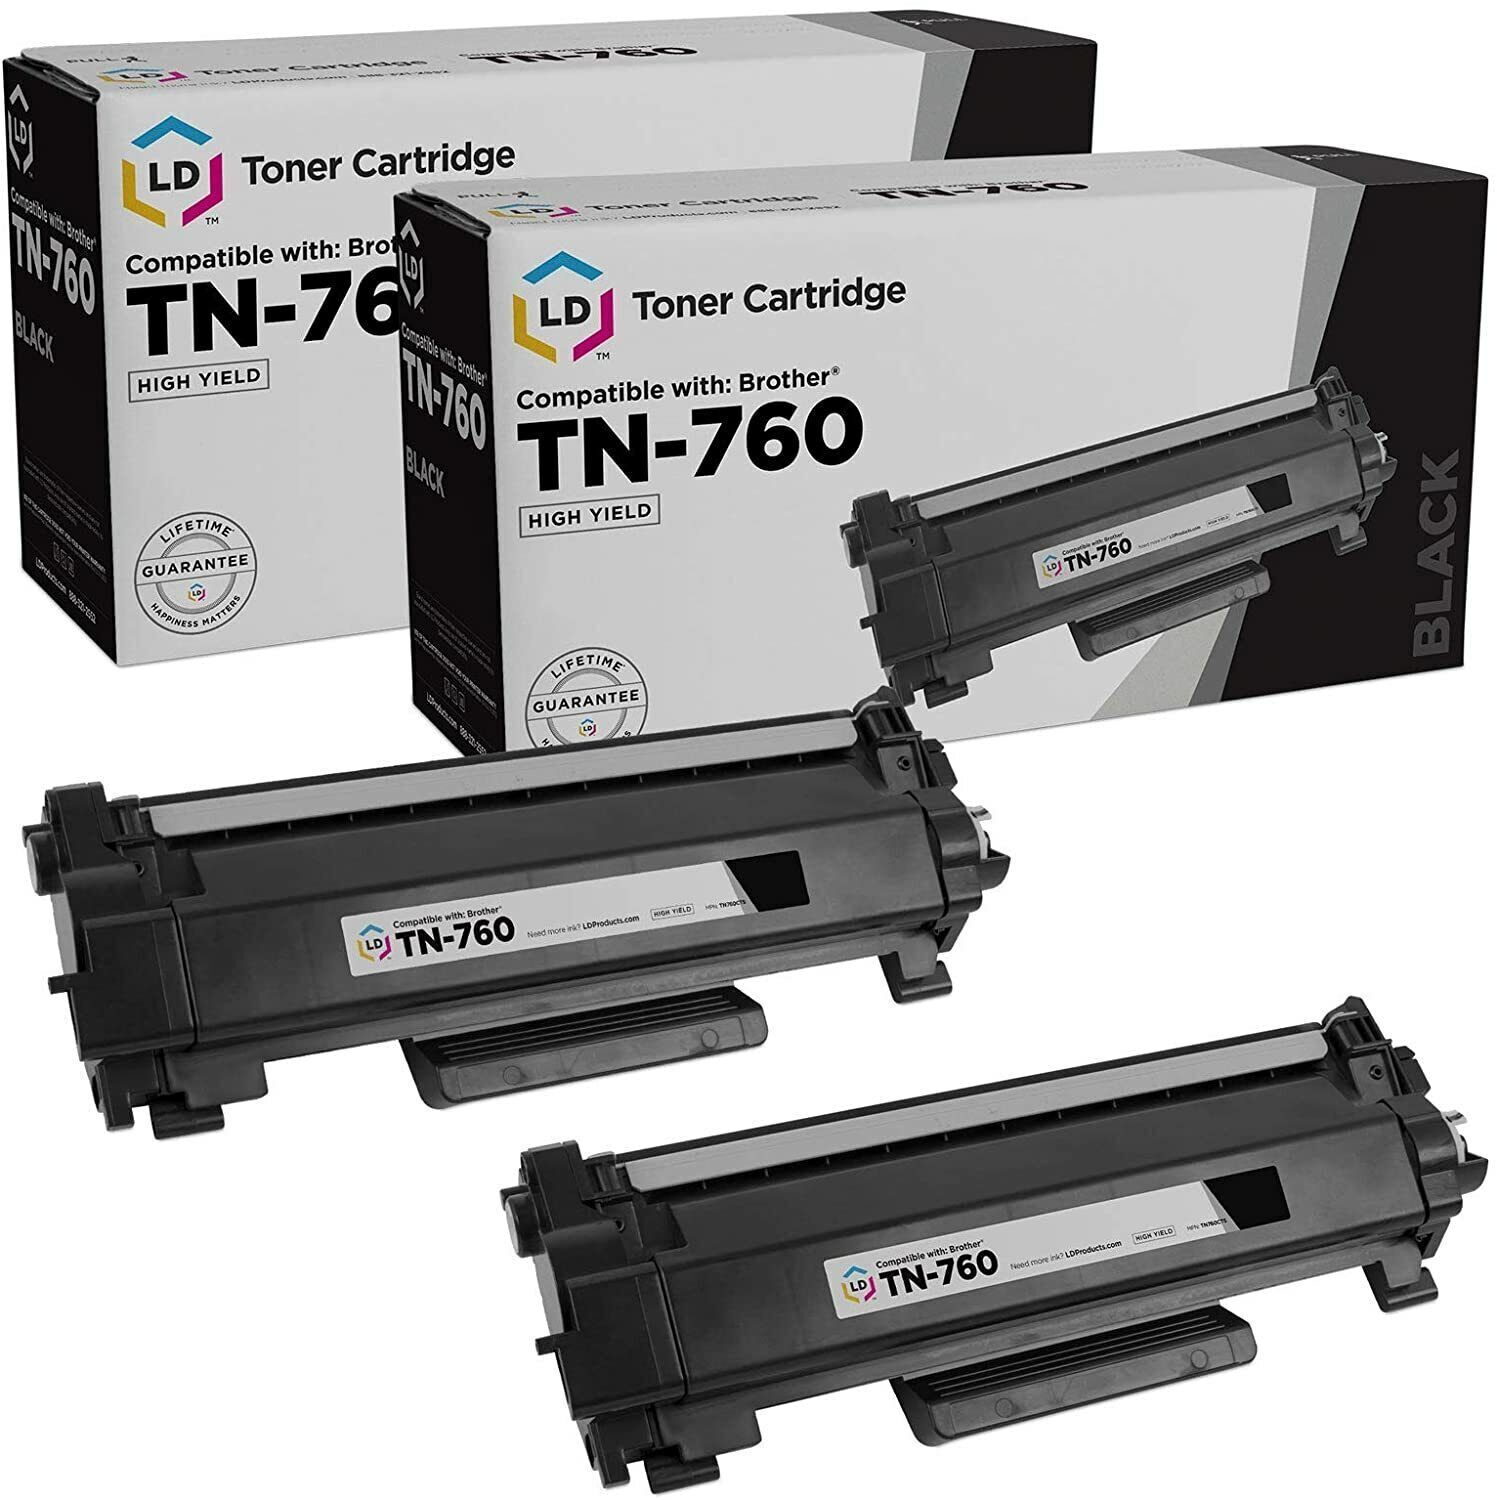 LD Products Toner Cartridge Replacement Brother TN760 TN-760 TN 760 Black 2-Pack